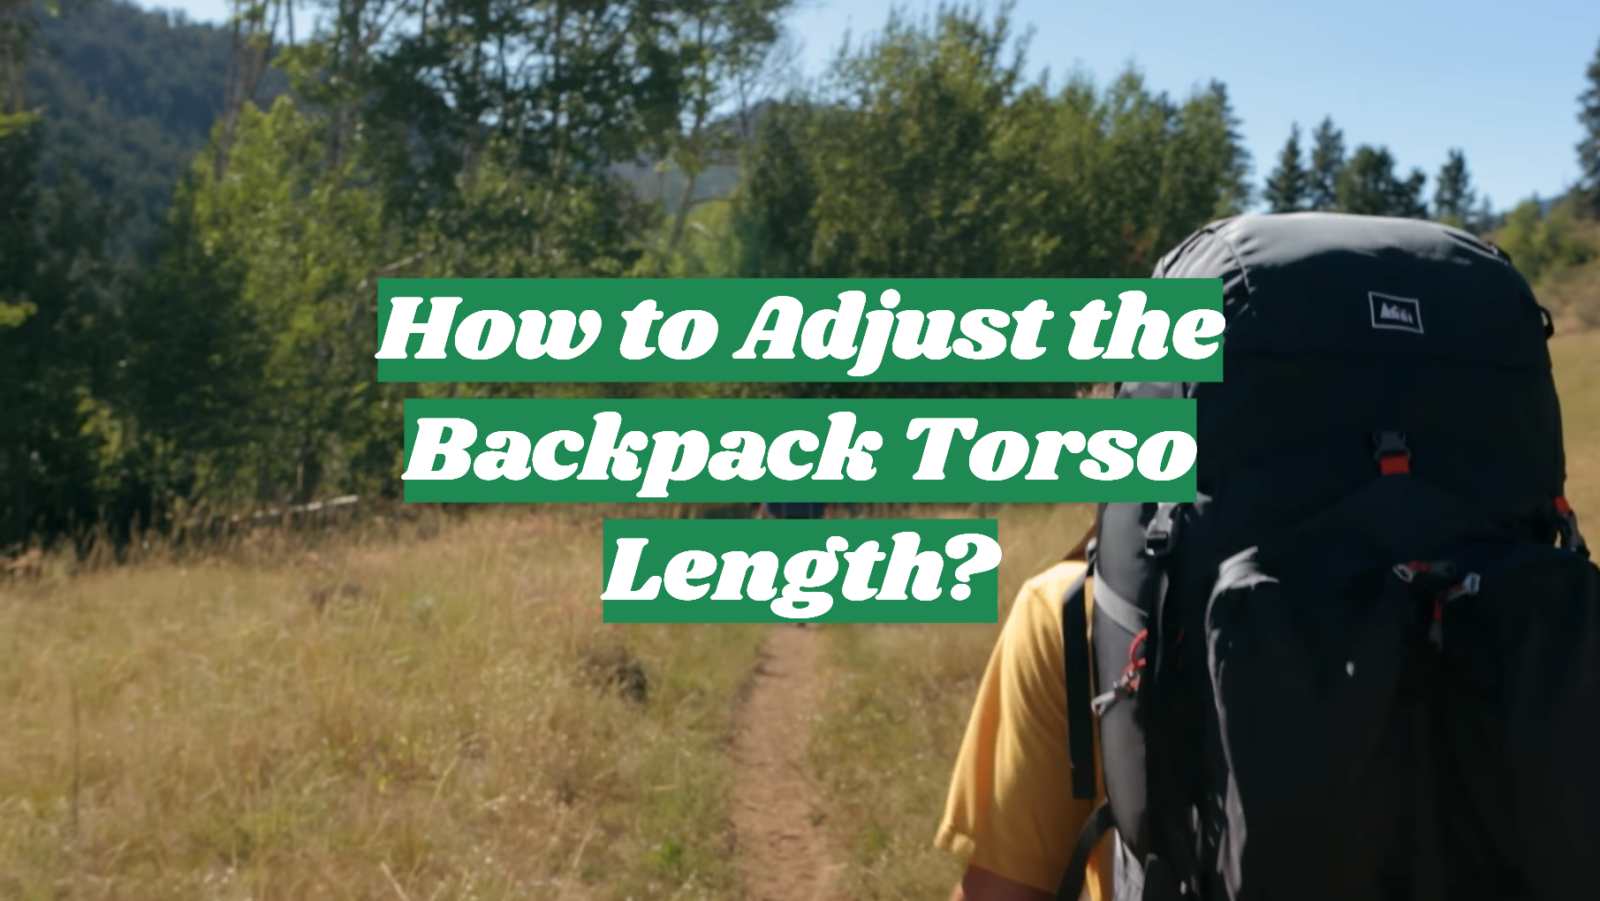 How to Adjust the Backpack Torso Length?